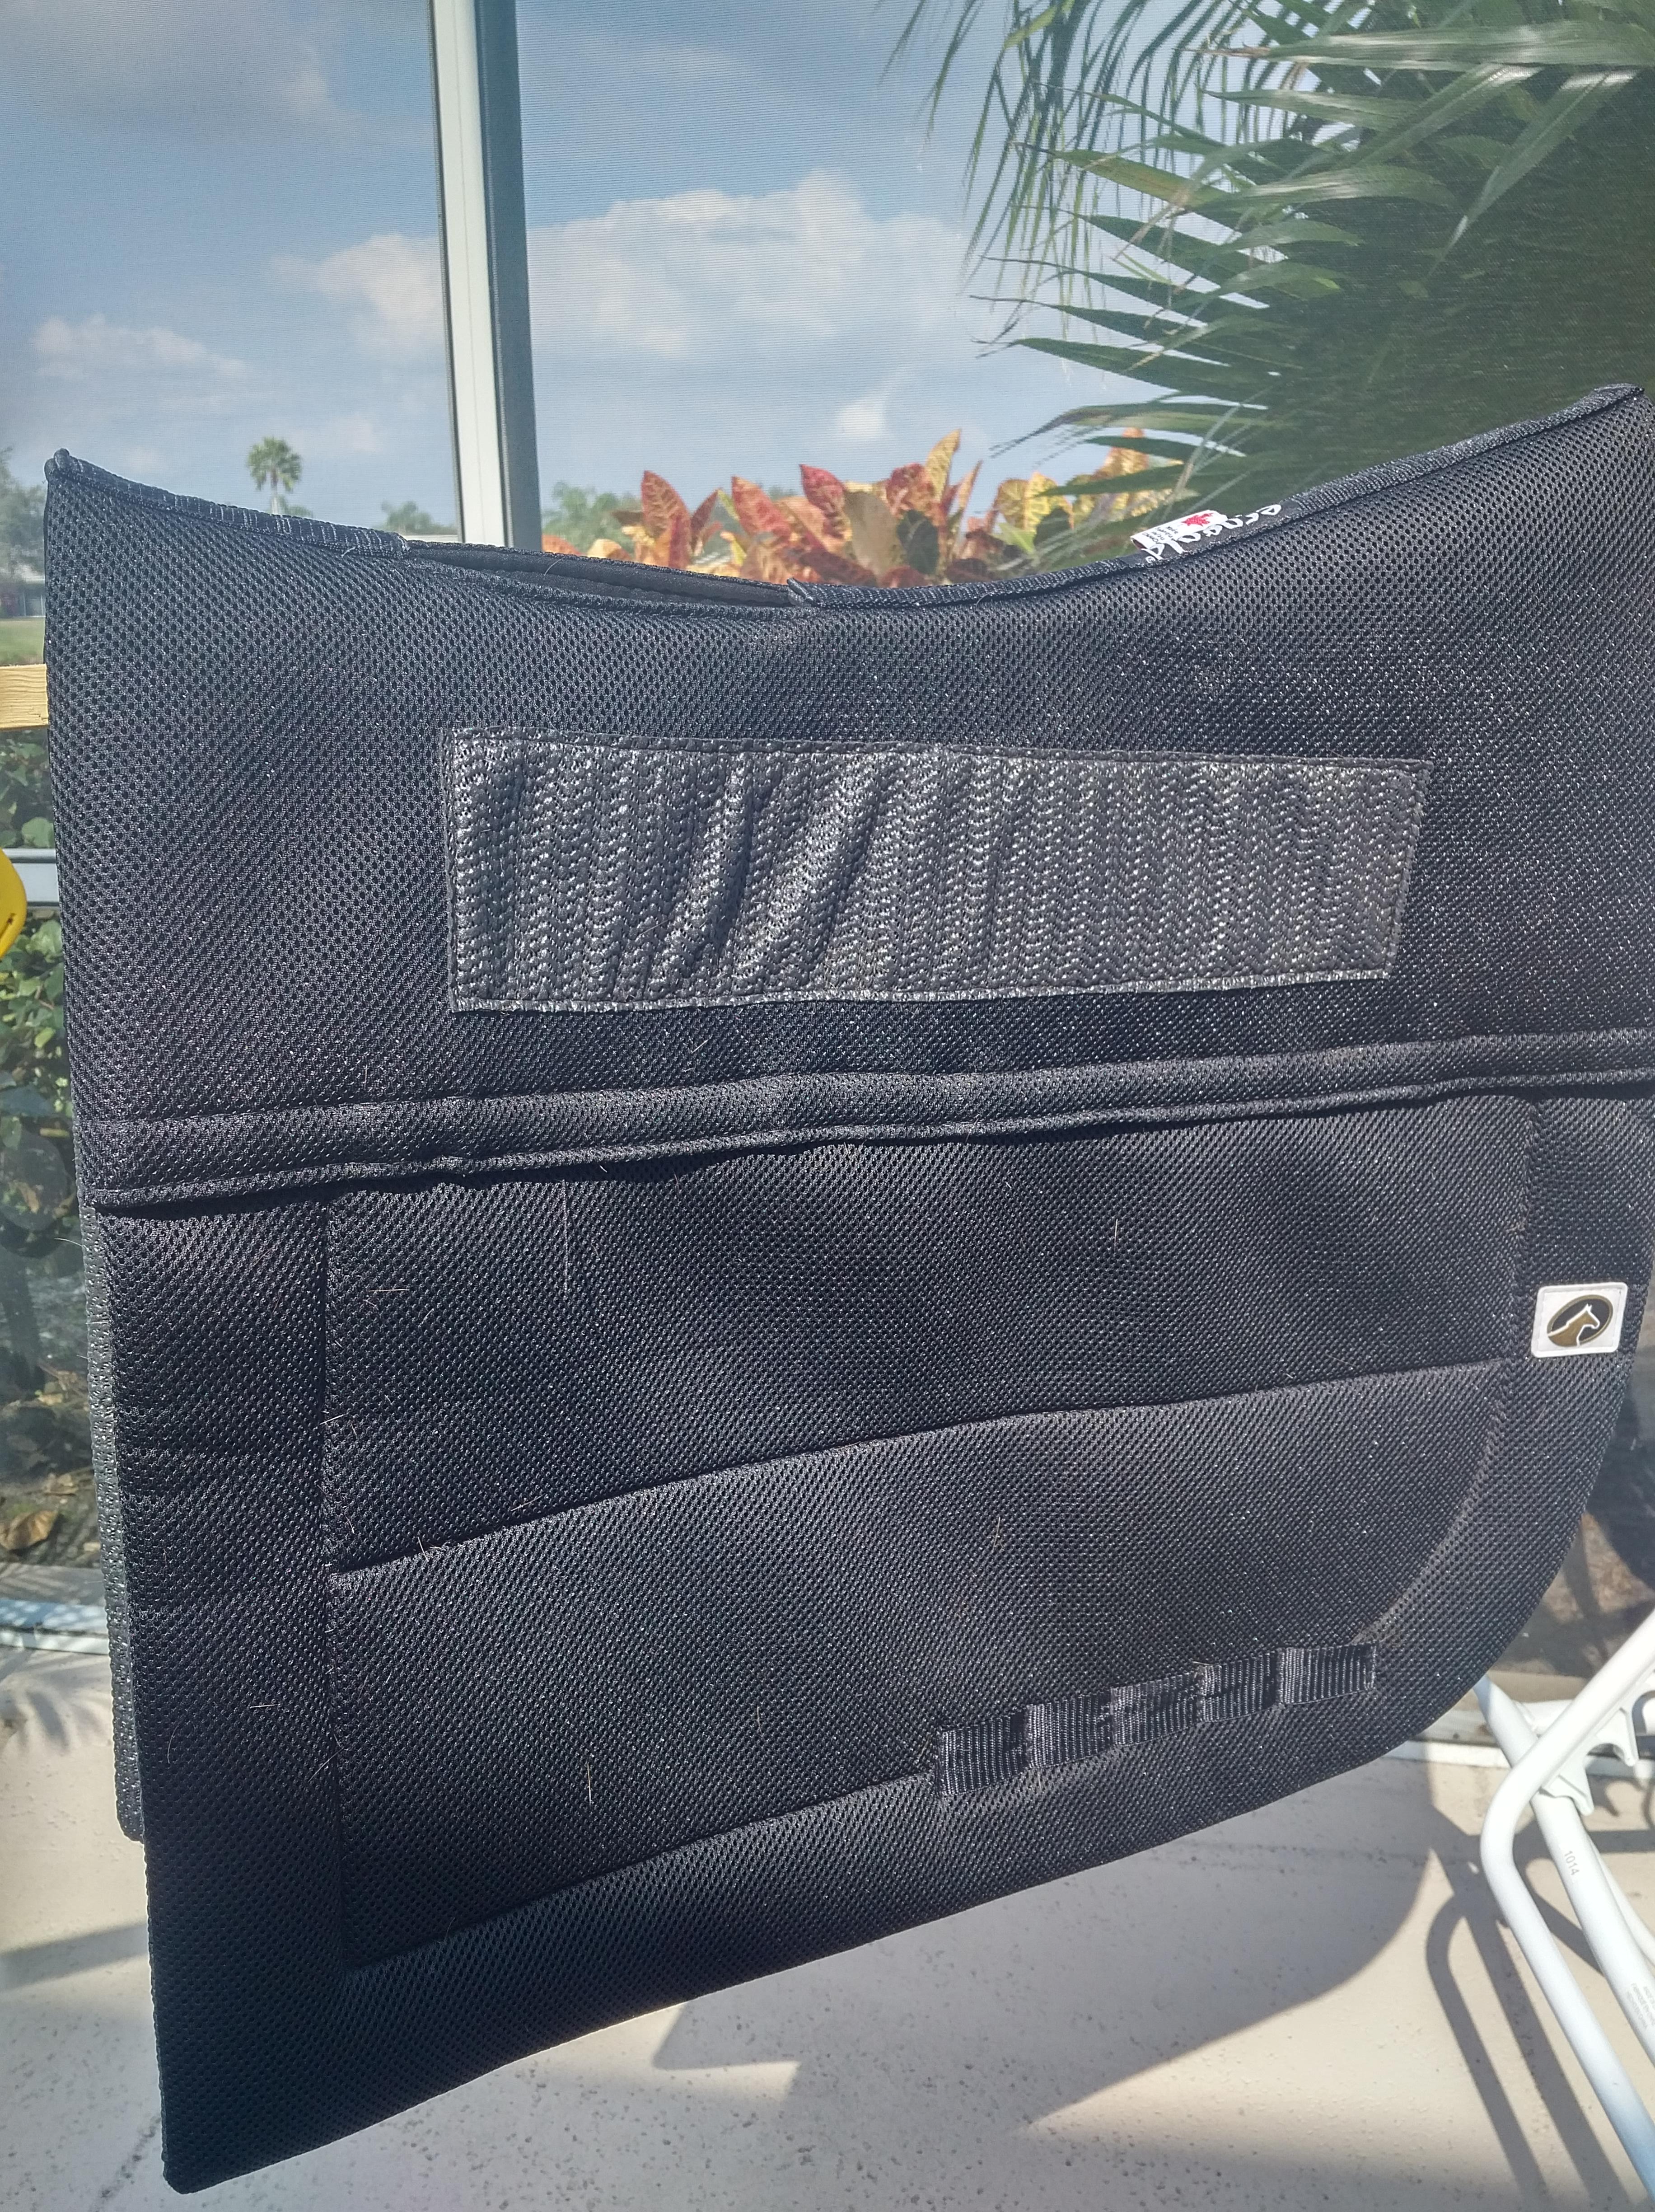 Product Review: Ecogold Coolfit Saddle Pad